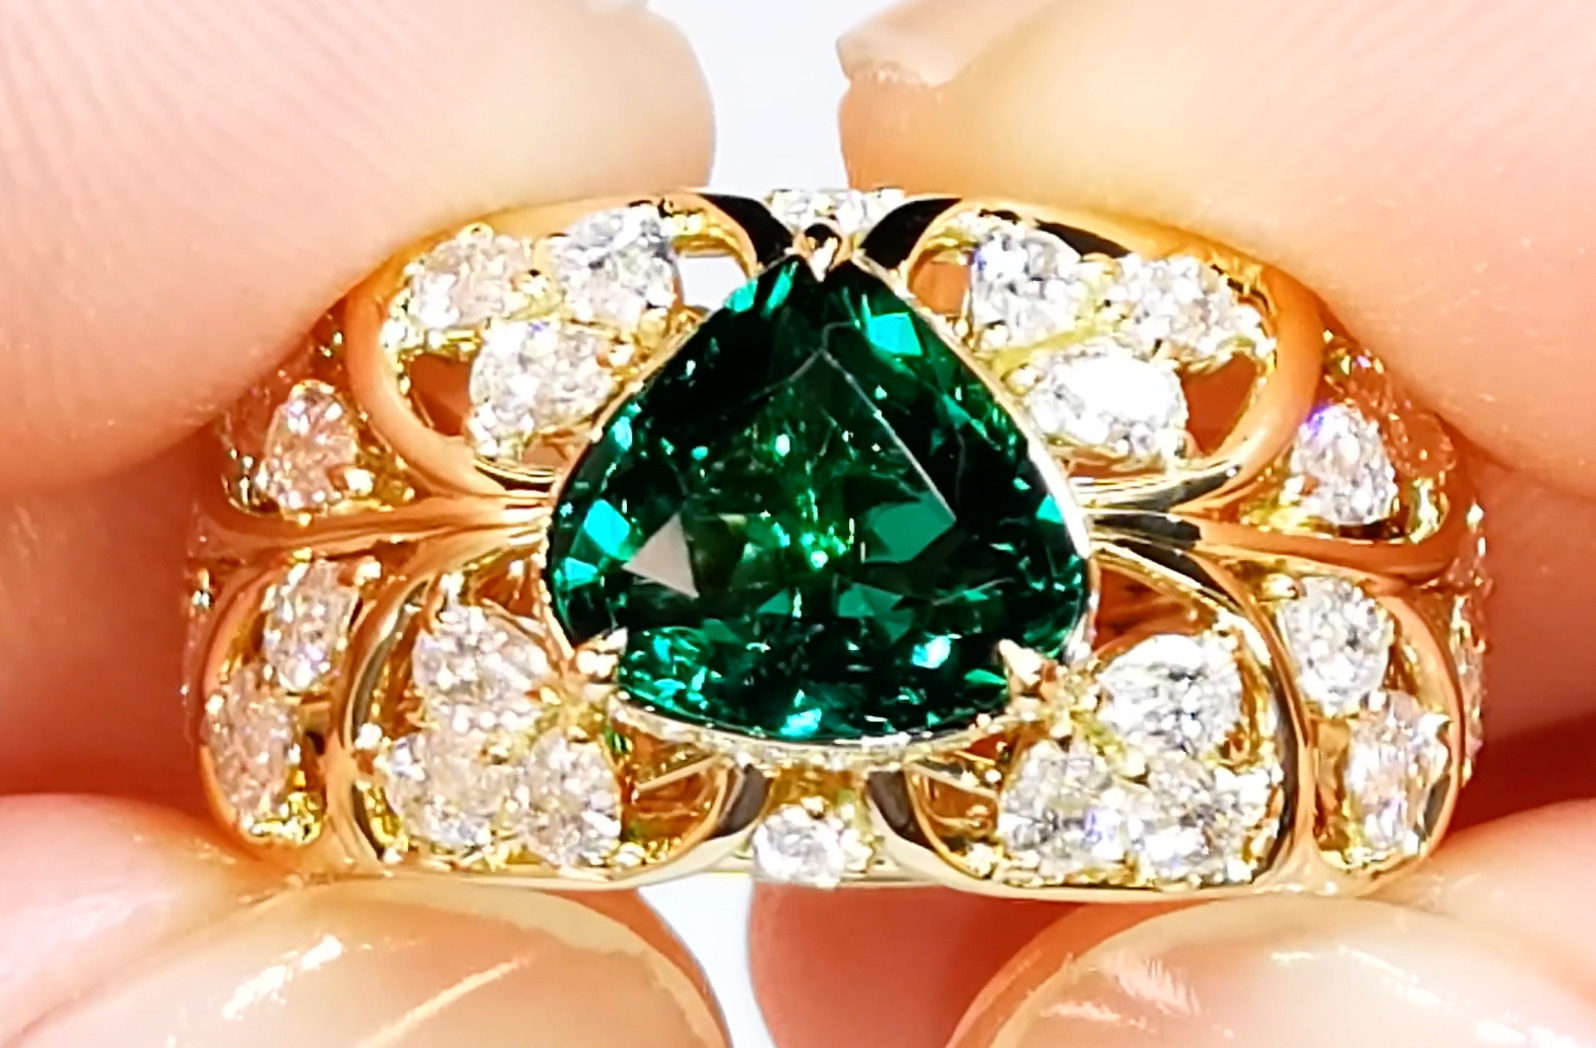 1.86ct Russian Emerald Ring with D Flawless Diamonds set in 18K Yellow Gold